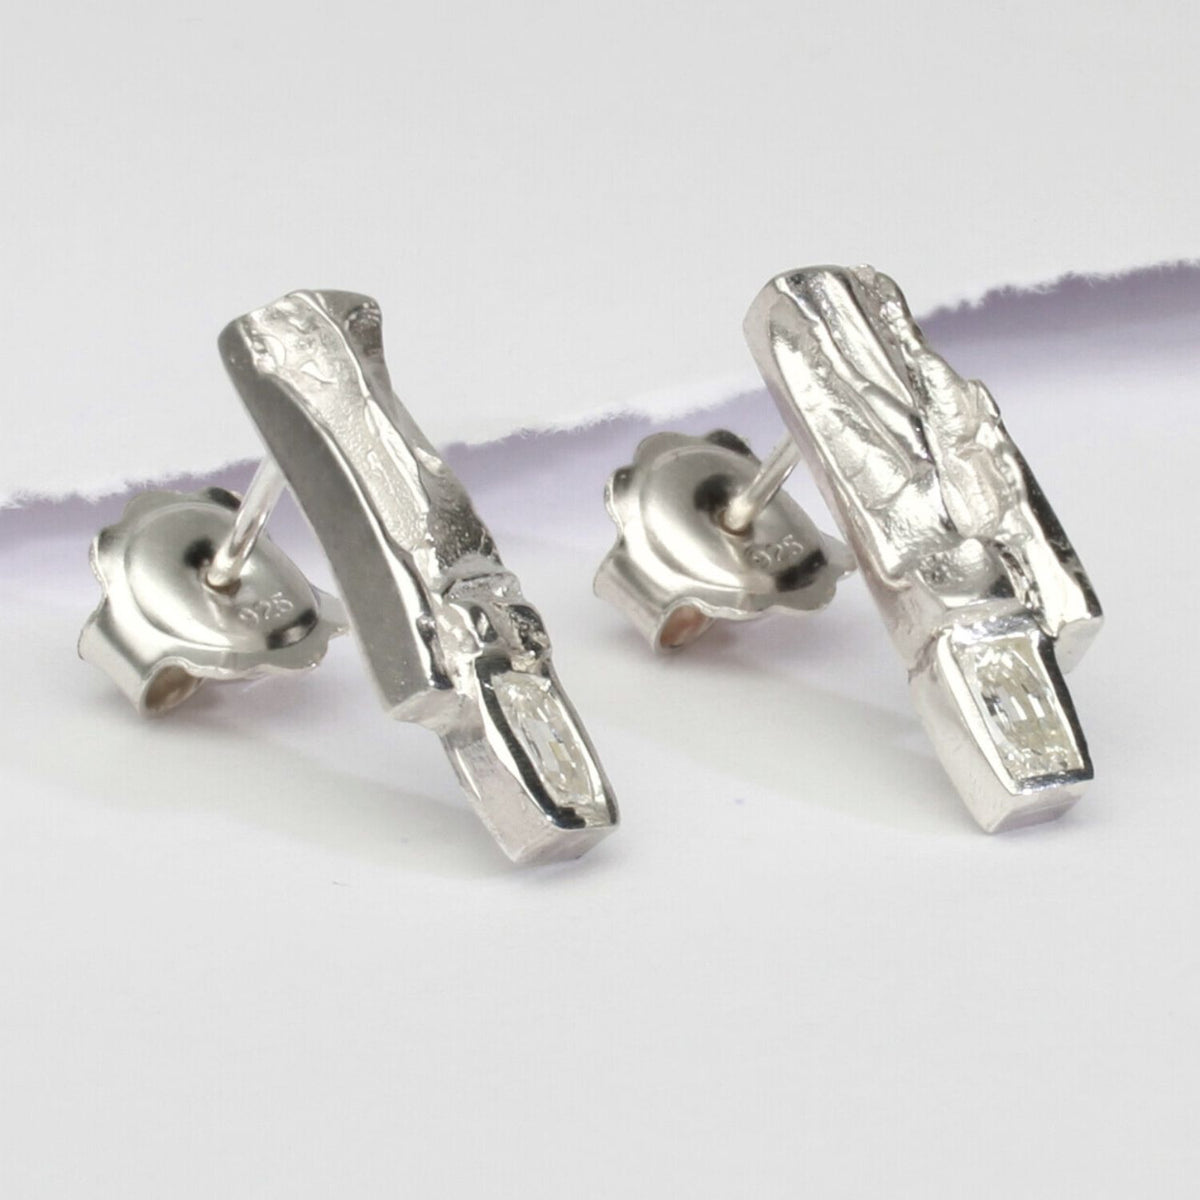 One of a Kind: (No. 12) Bespoke Carved Silver earrings with diamonds